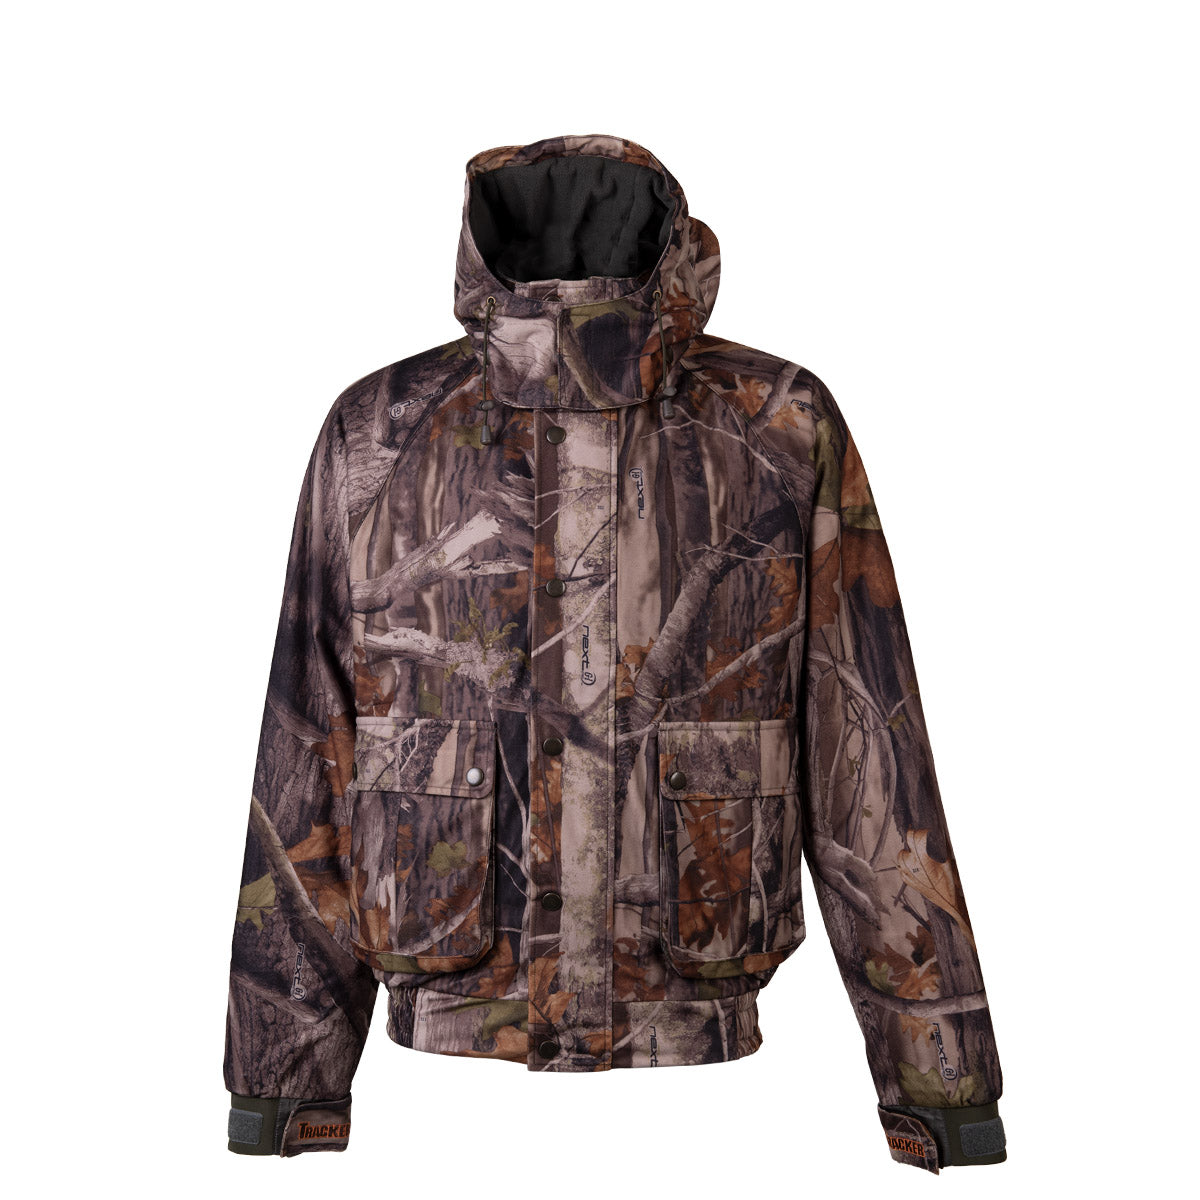 TRACKER "Next G1" Hunting Set - Insulated